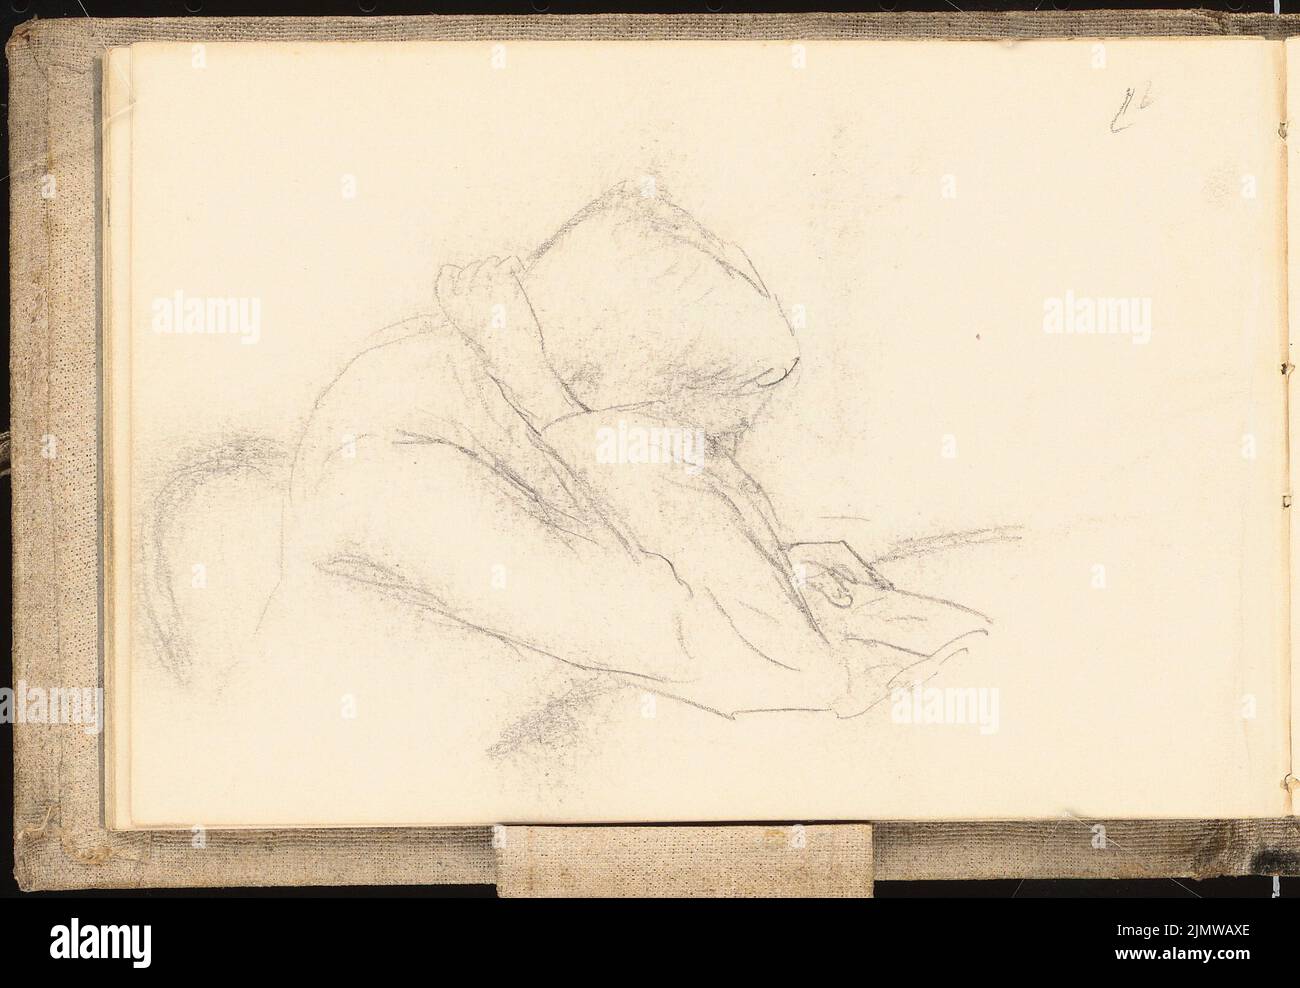 Michel Paul sen. (1877-1938), sketchbook. Watercolors and drawings (approx. 1900): In reading the boy sunk in the table (half -length portrait). Pencil on paper, 12.4 x 17.9 cm (including scan edges) Michel Paul sen.  (1877-1938): Skizzenbuch. Aquarelle und Zeichnungen Stock Photo